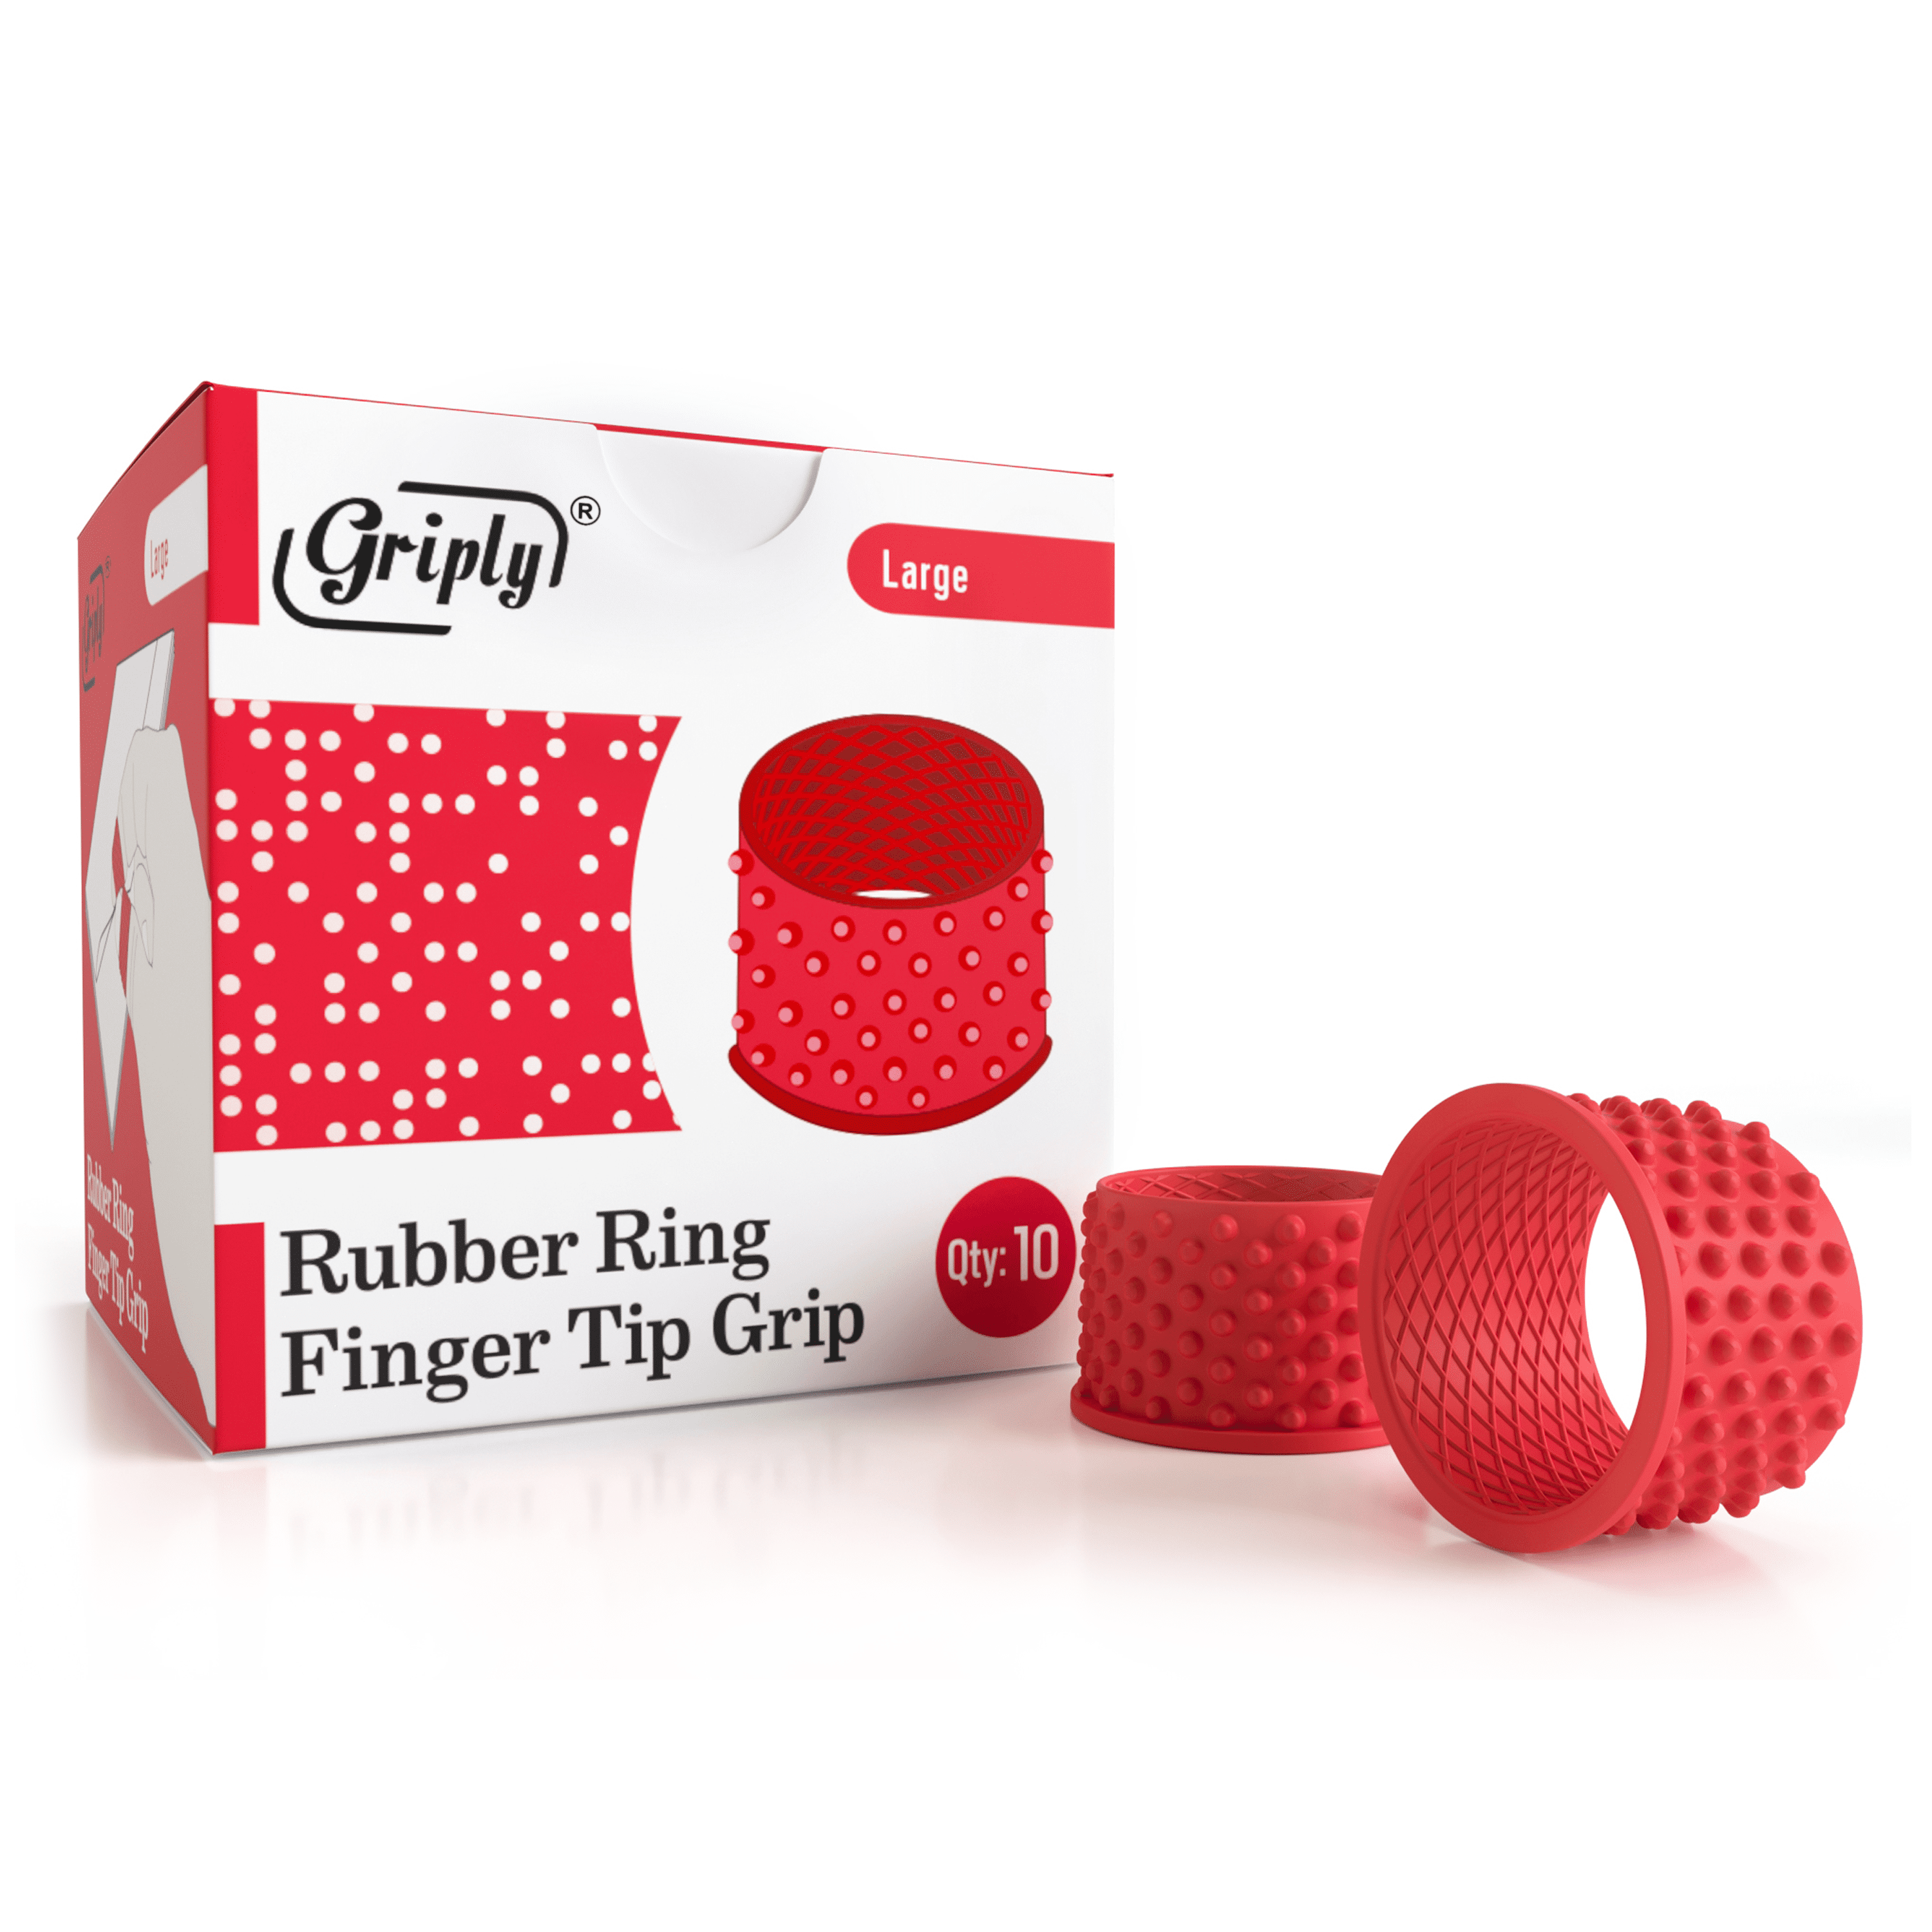 Free Shipping* Size-11.5 Thimbles Rubber Finger Tips Medium Count=12 